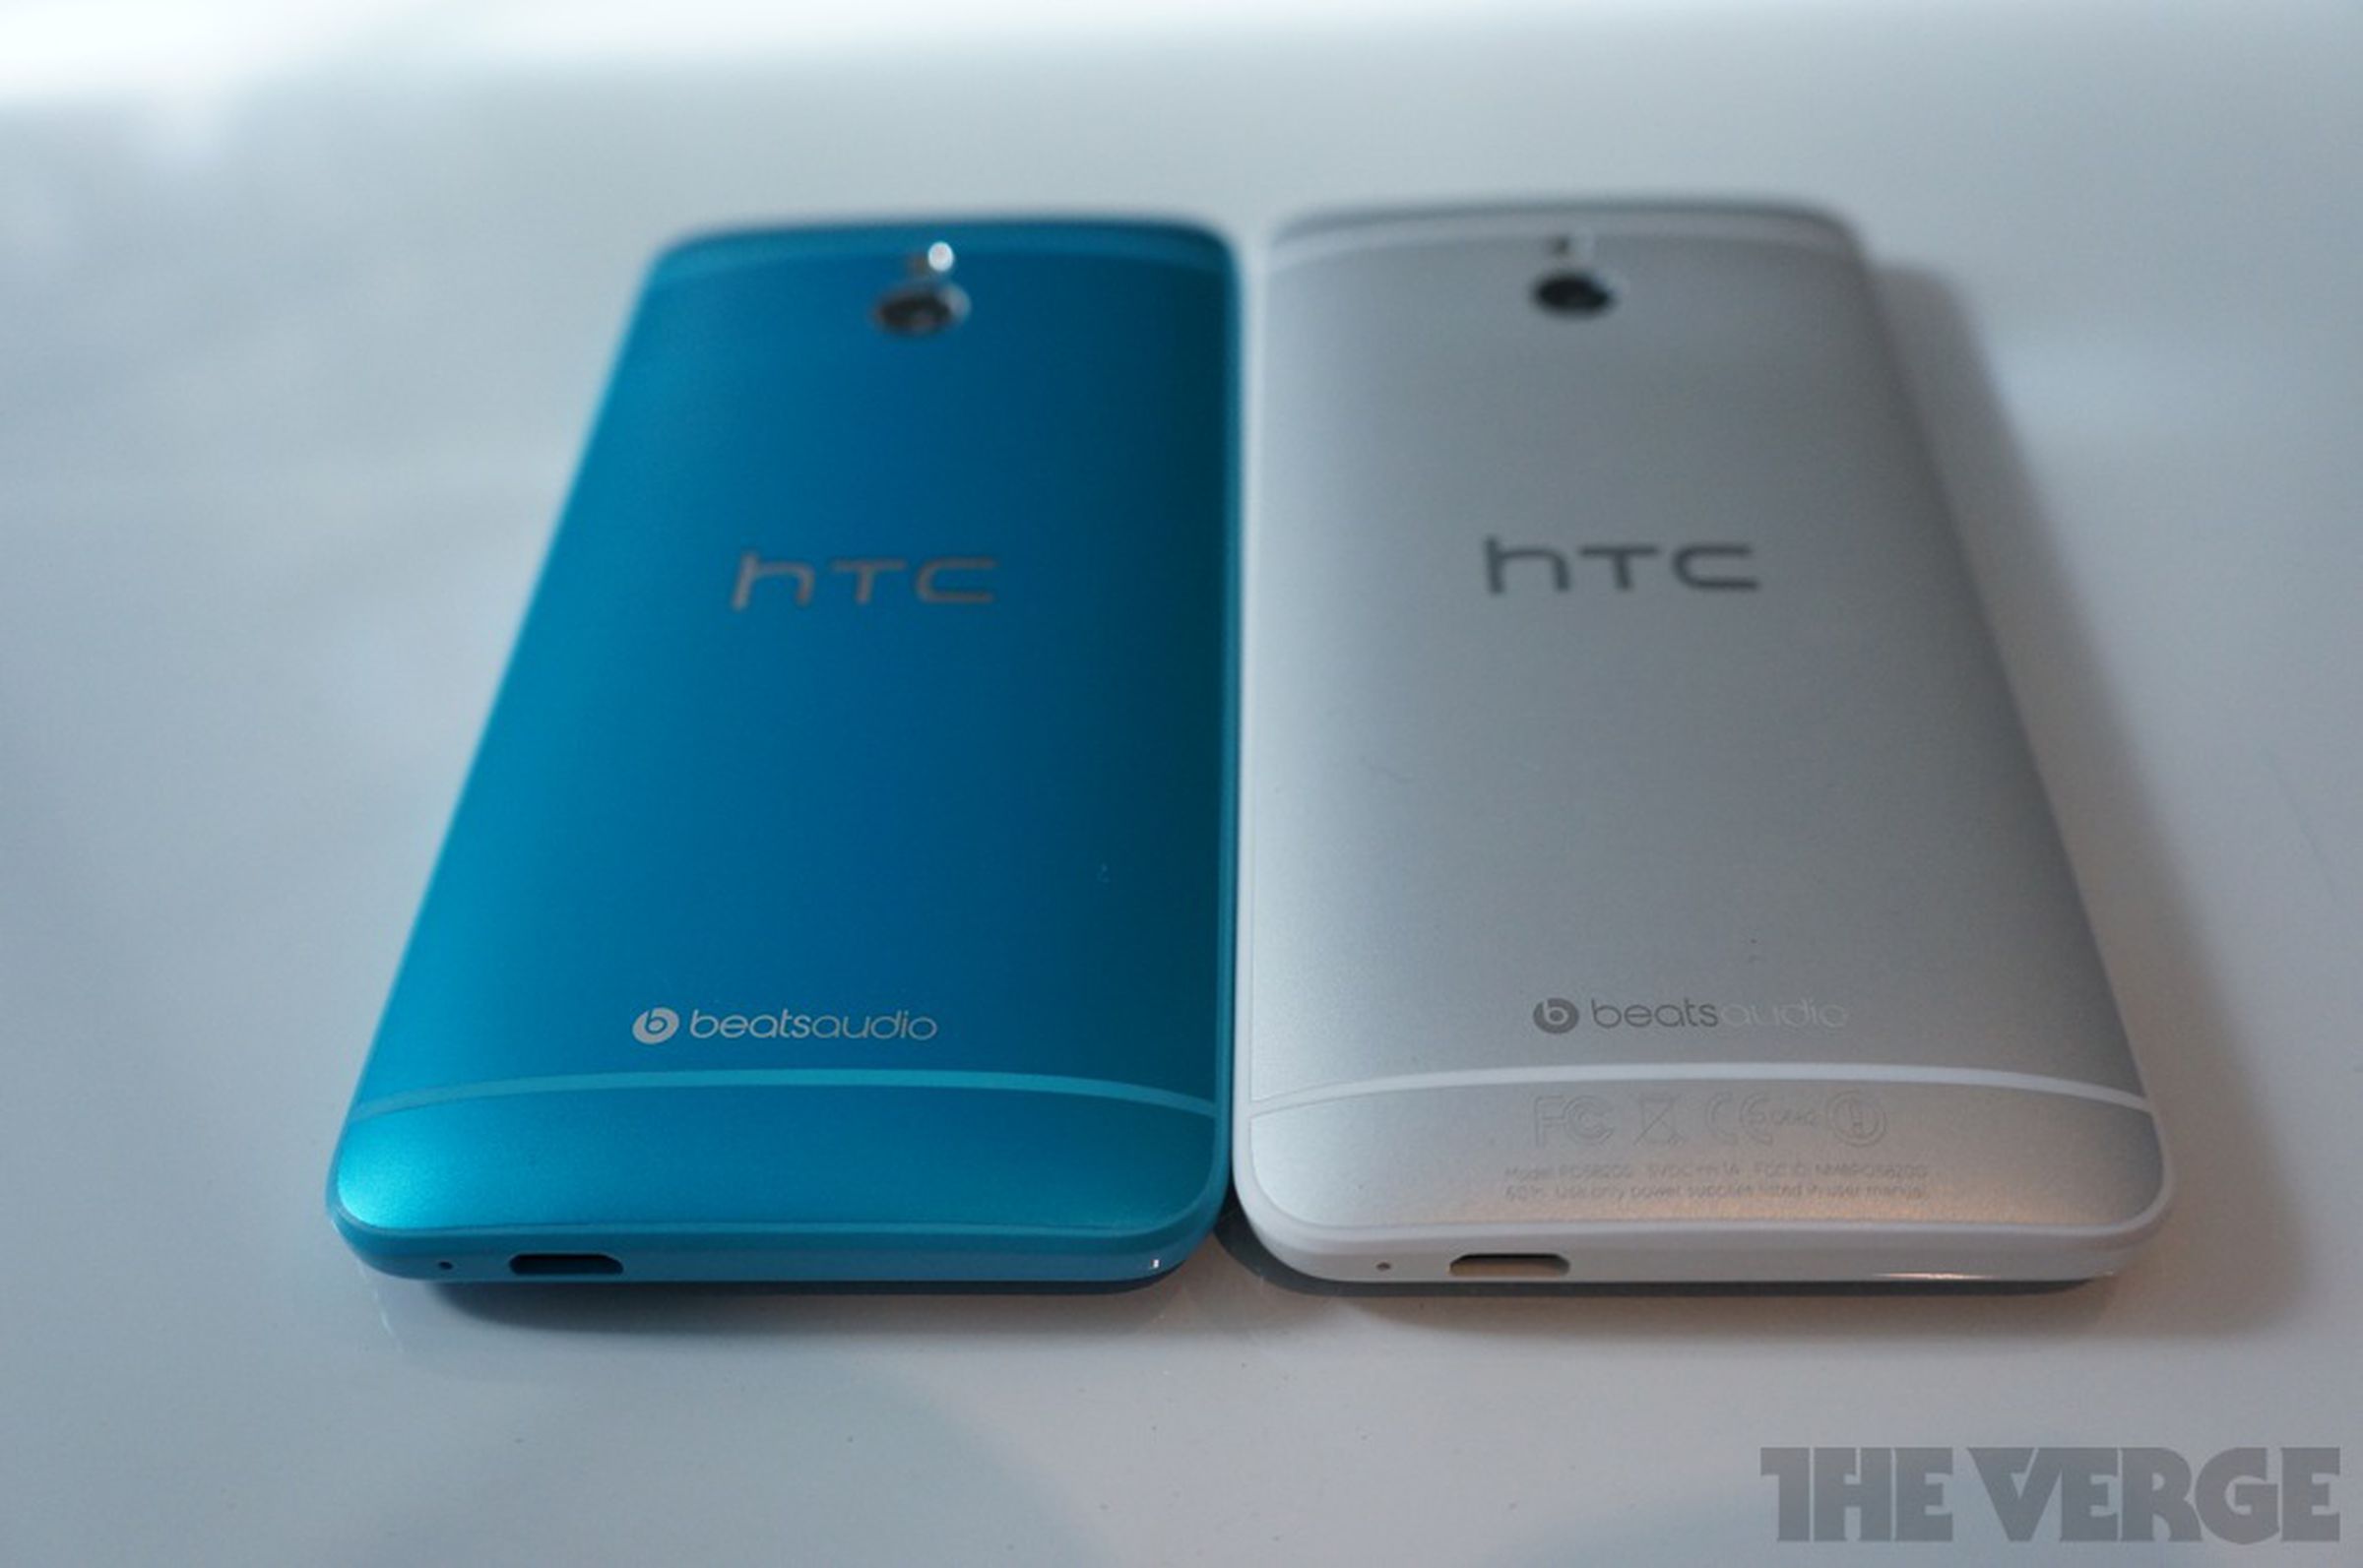 HTC One and One mini in Vivid Blue